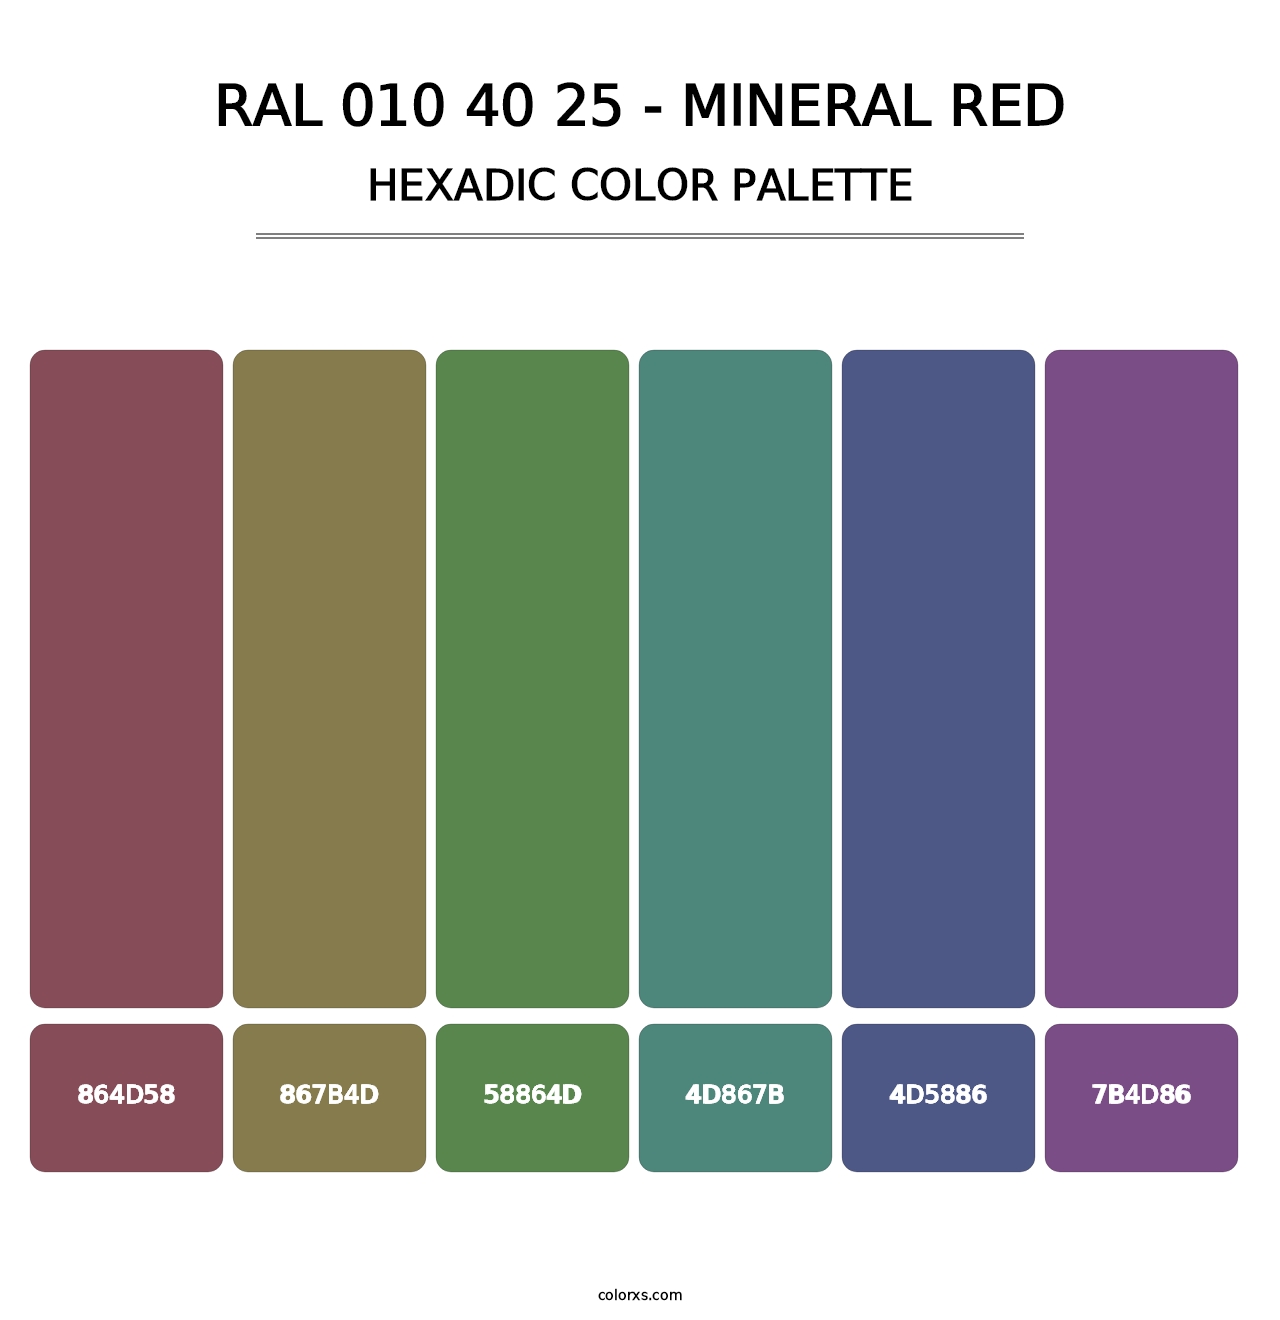 RAL 010 40 25 - Mineral Red - Hexadic Color Palette